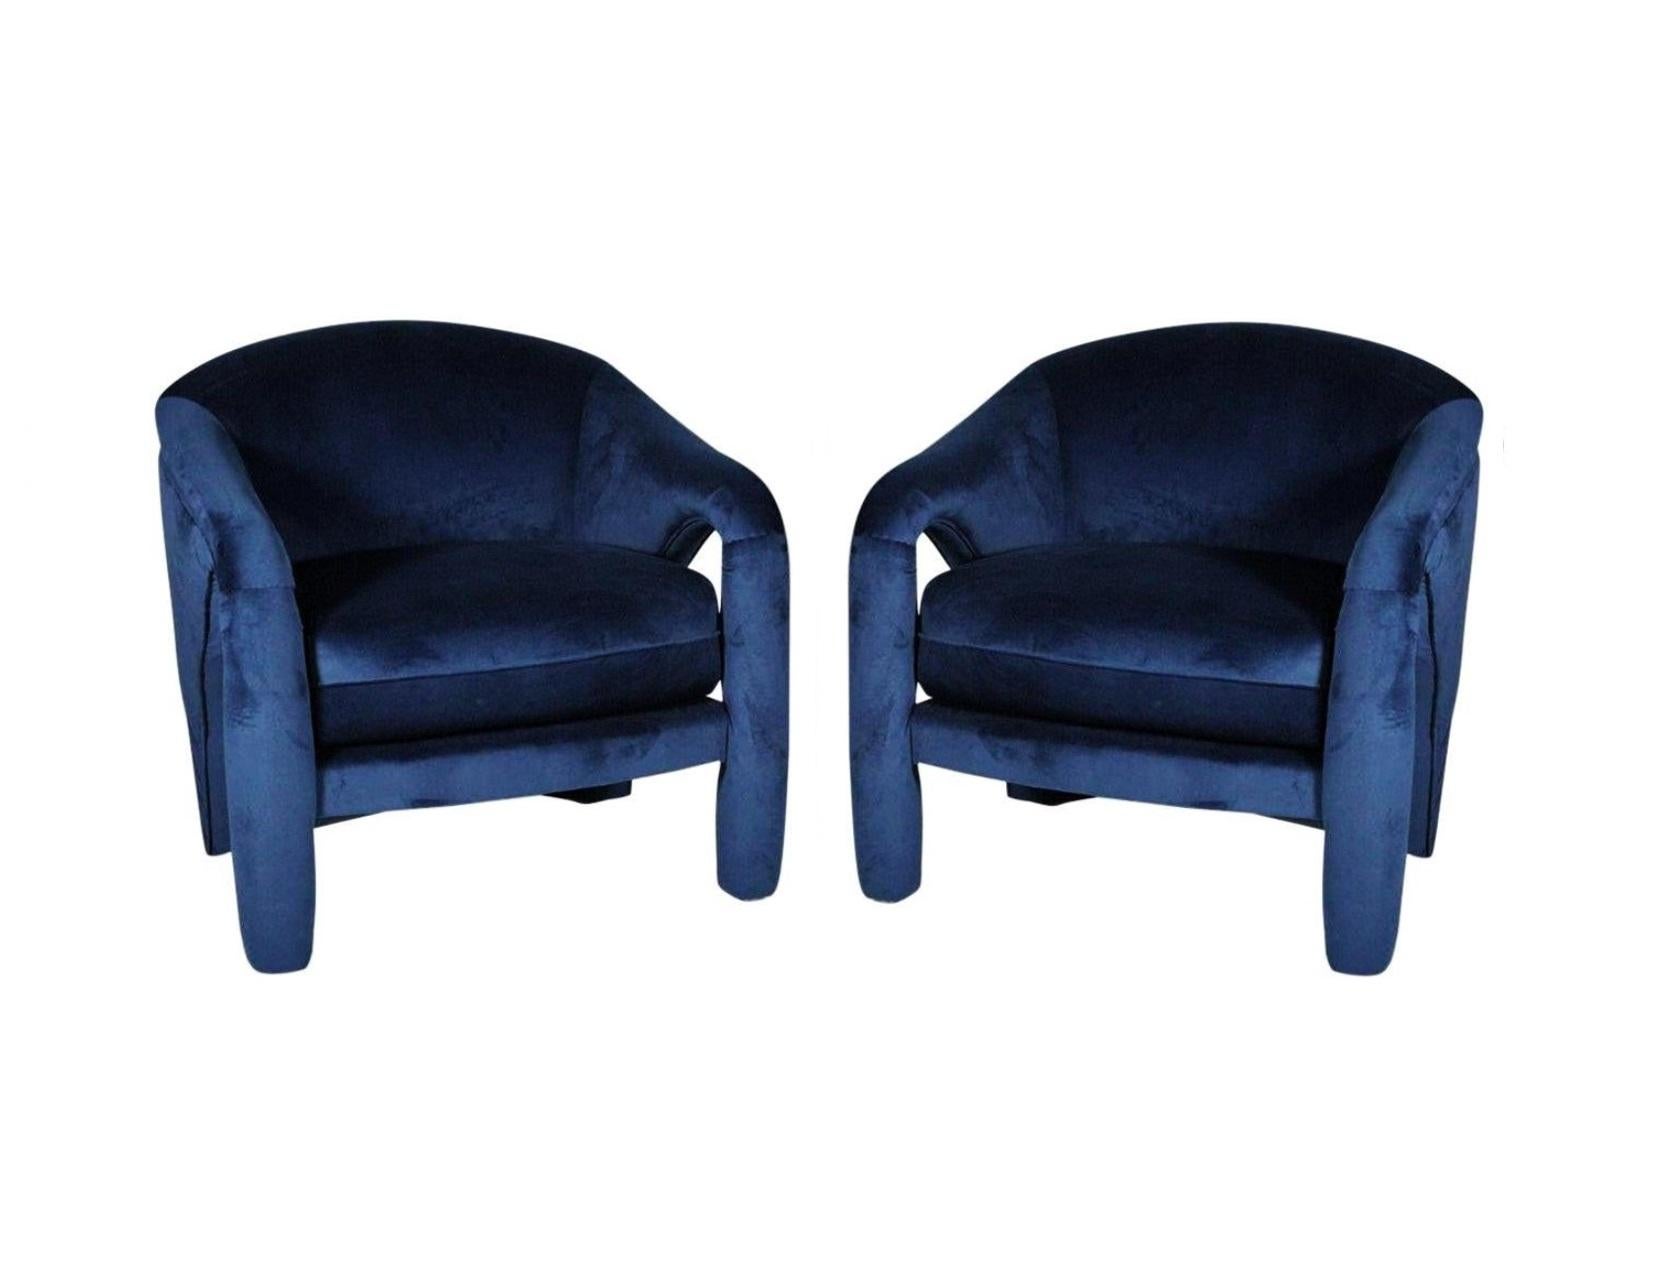 Mid-Century Modern Vladimir Kaganesque Navy Blue Lounge Chairs by Weiman For Sale